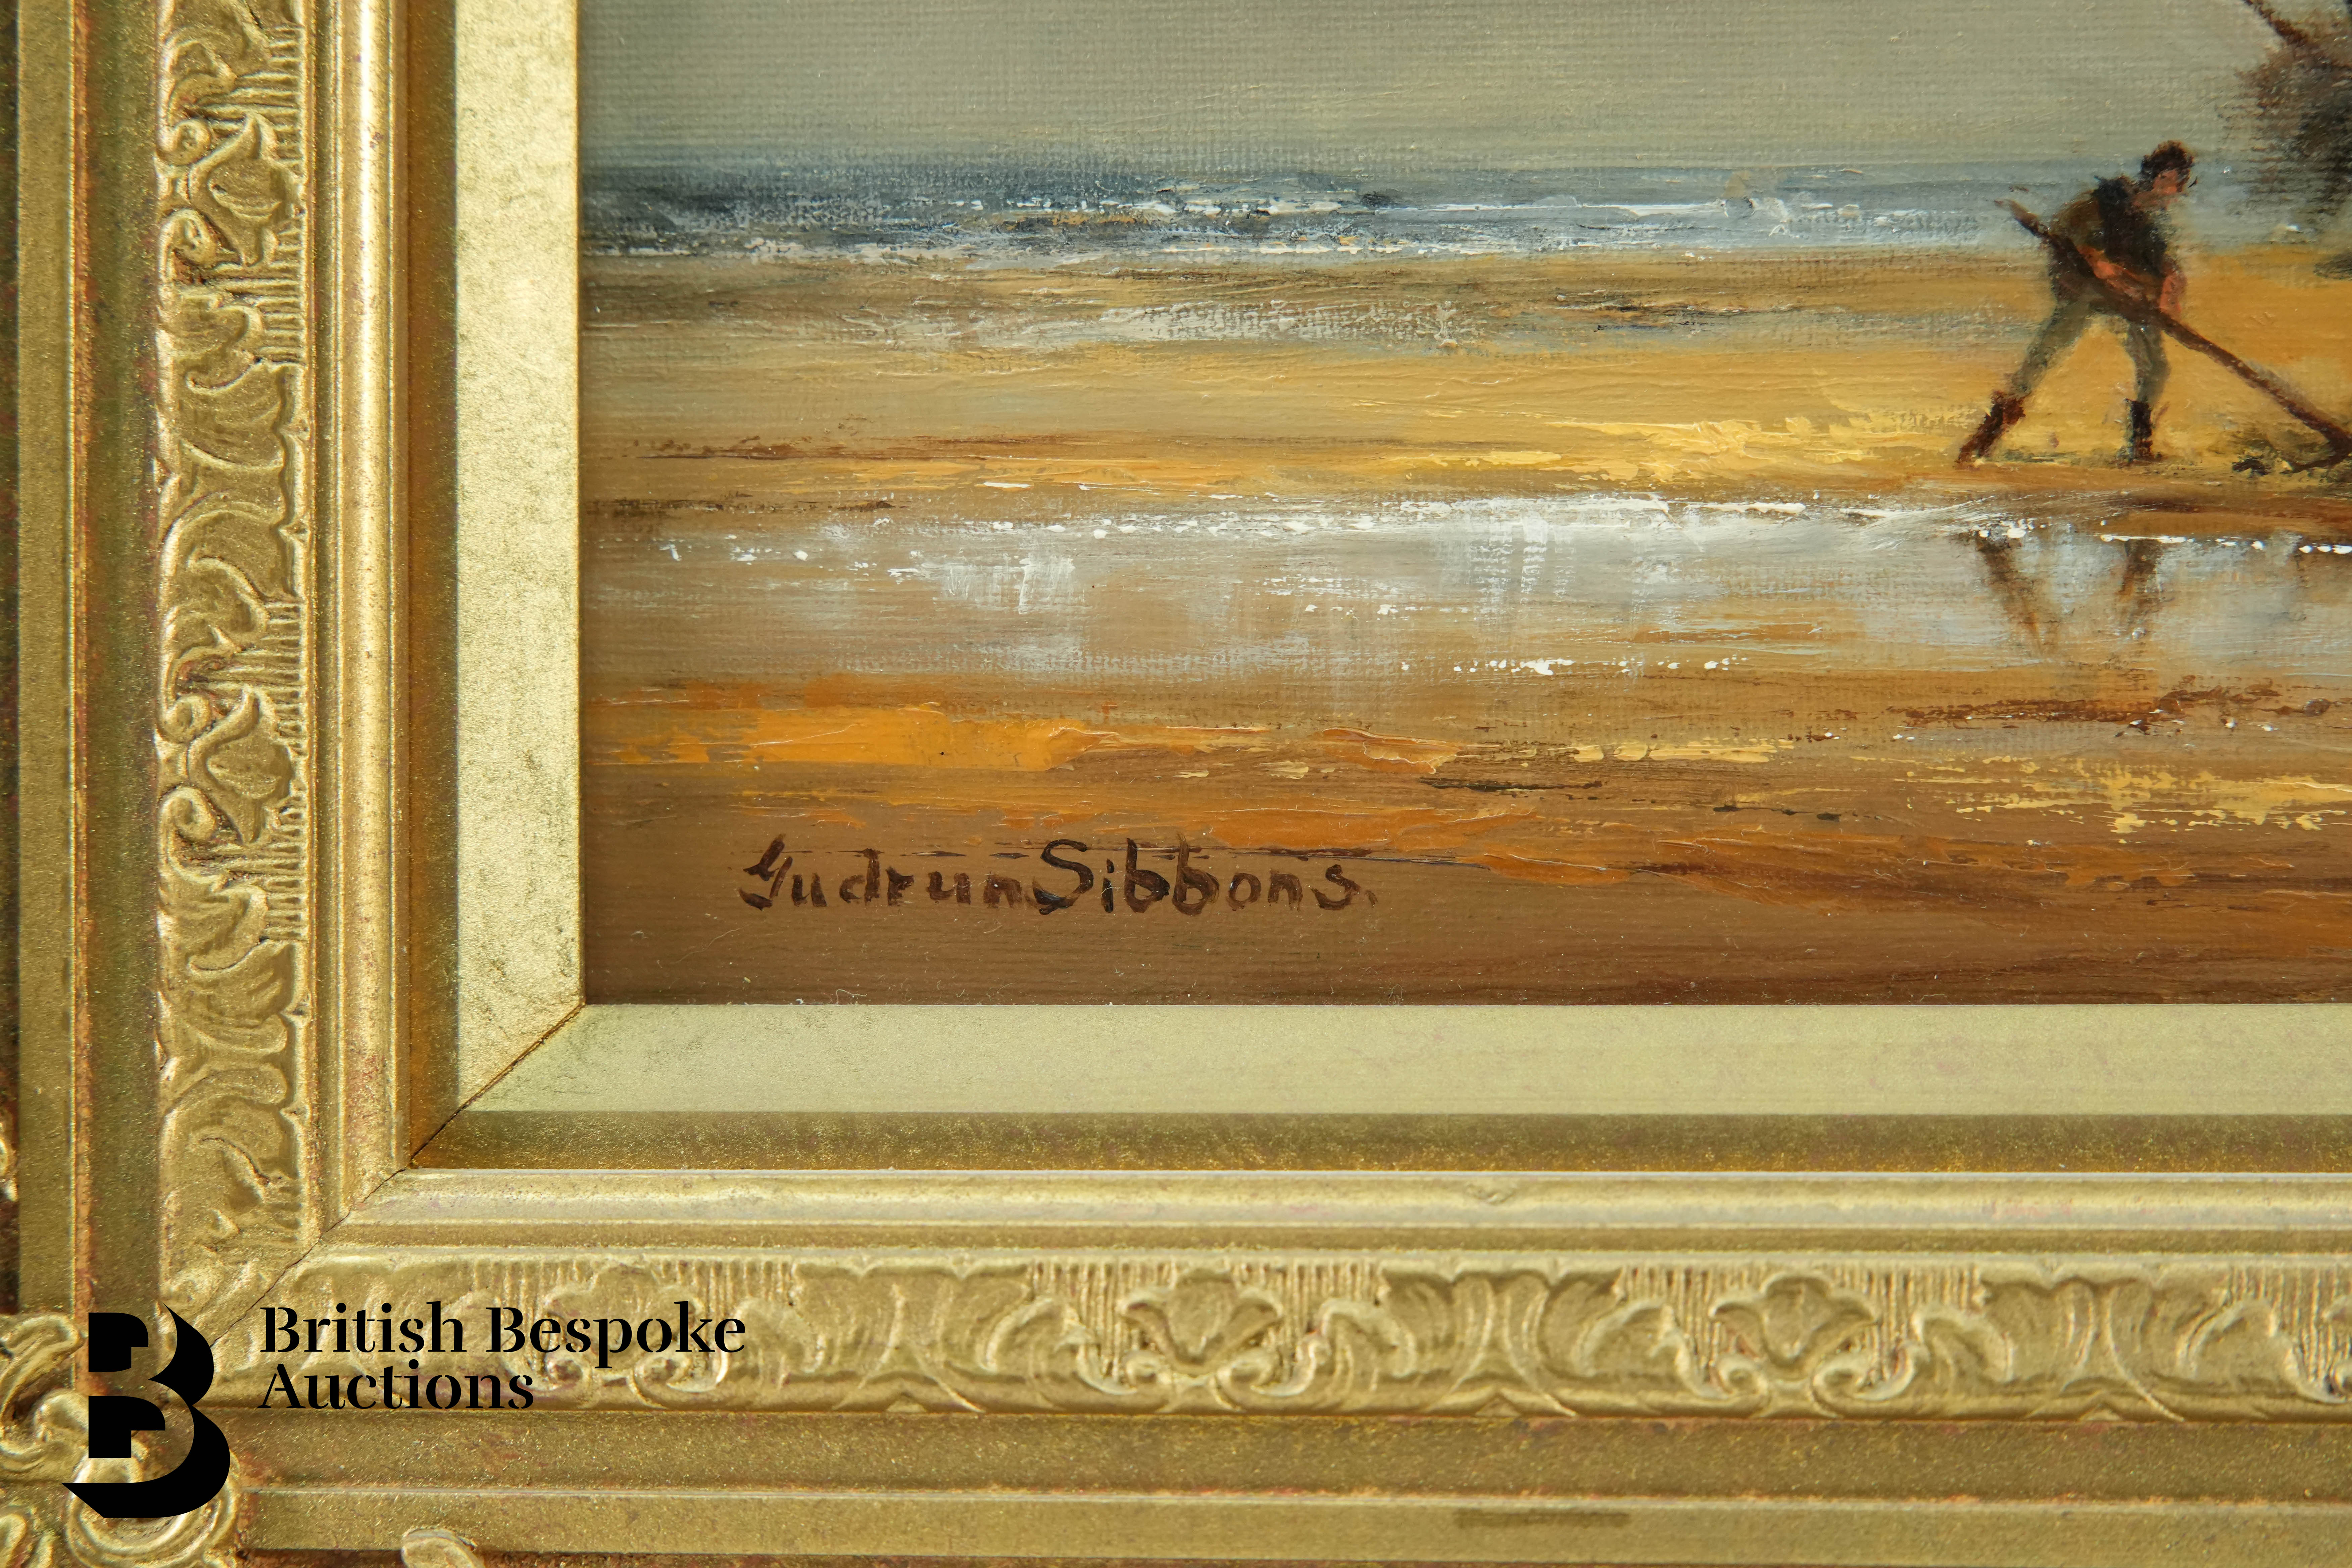 Gudrun Sibbons Oil on Board - Image 5 of 6